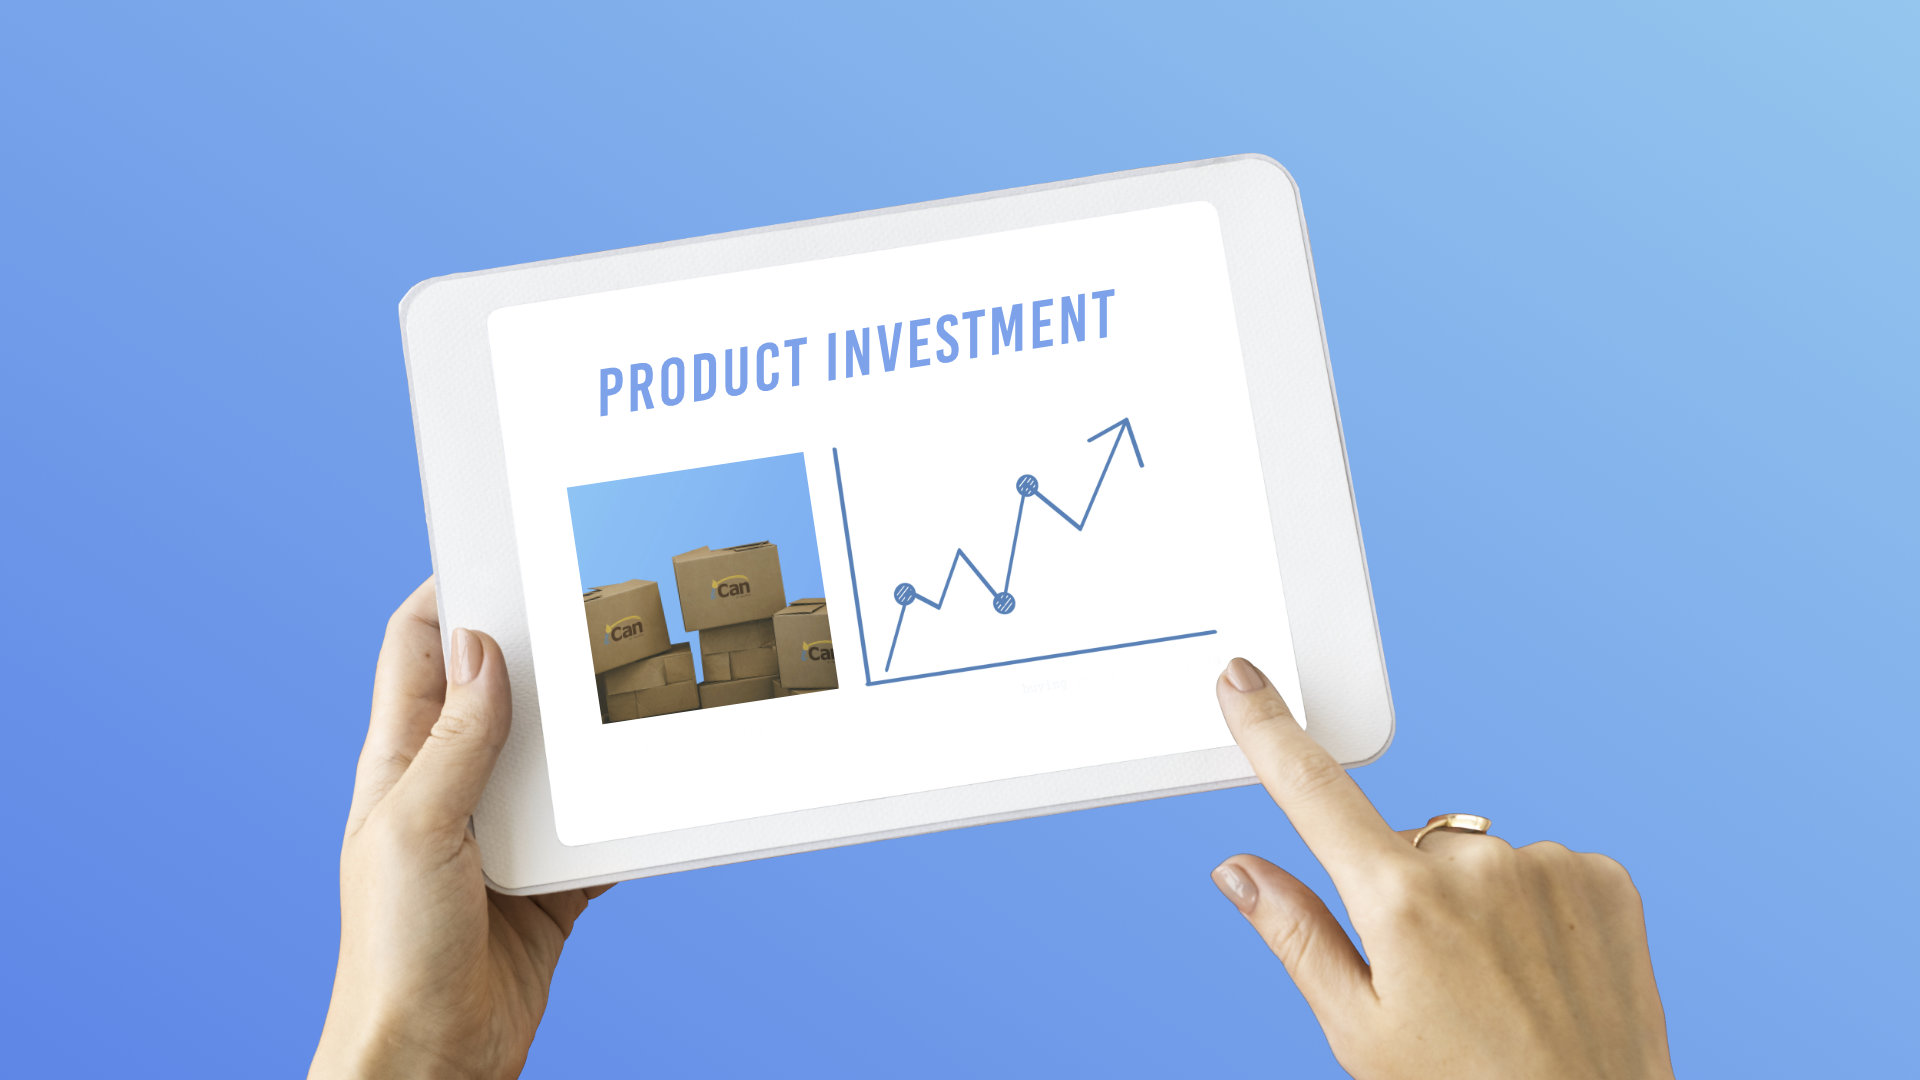 Product investment icon